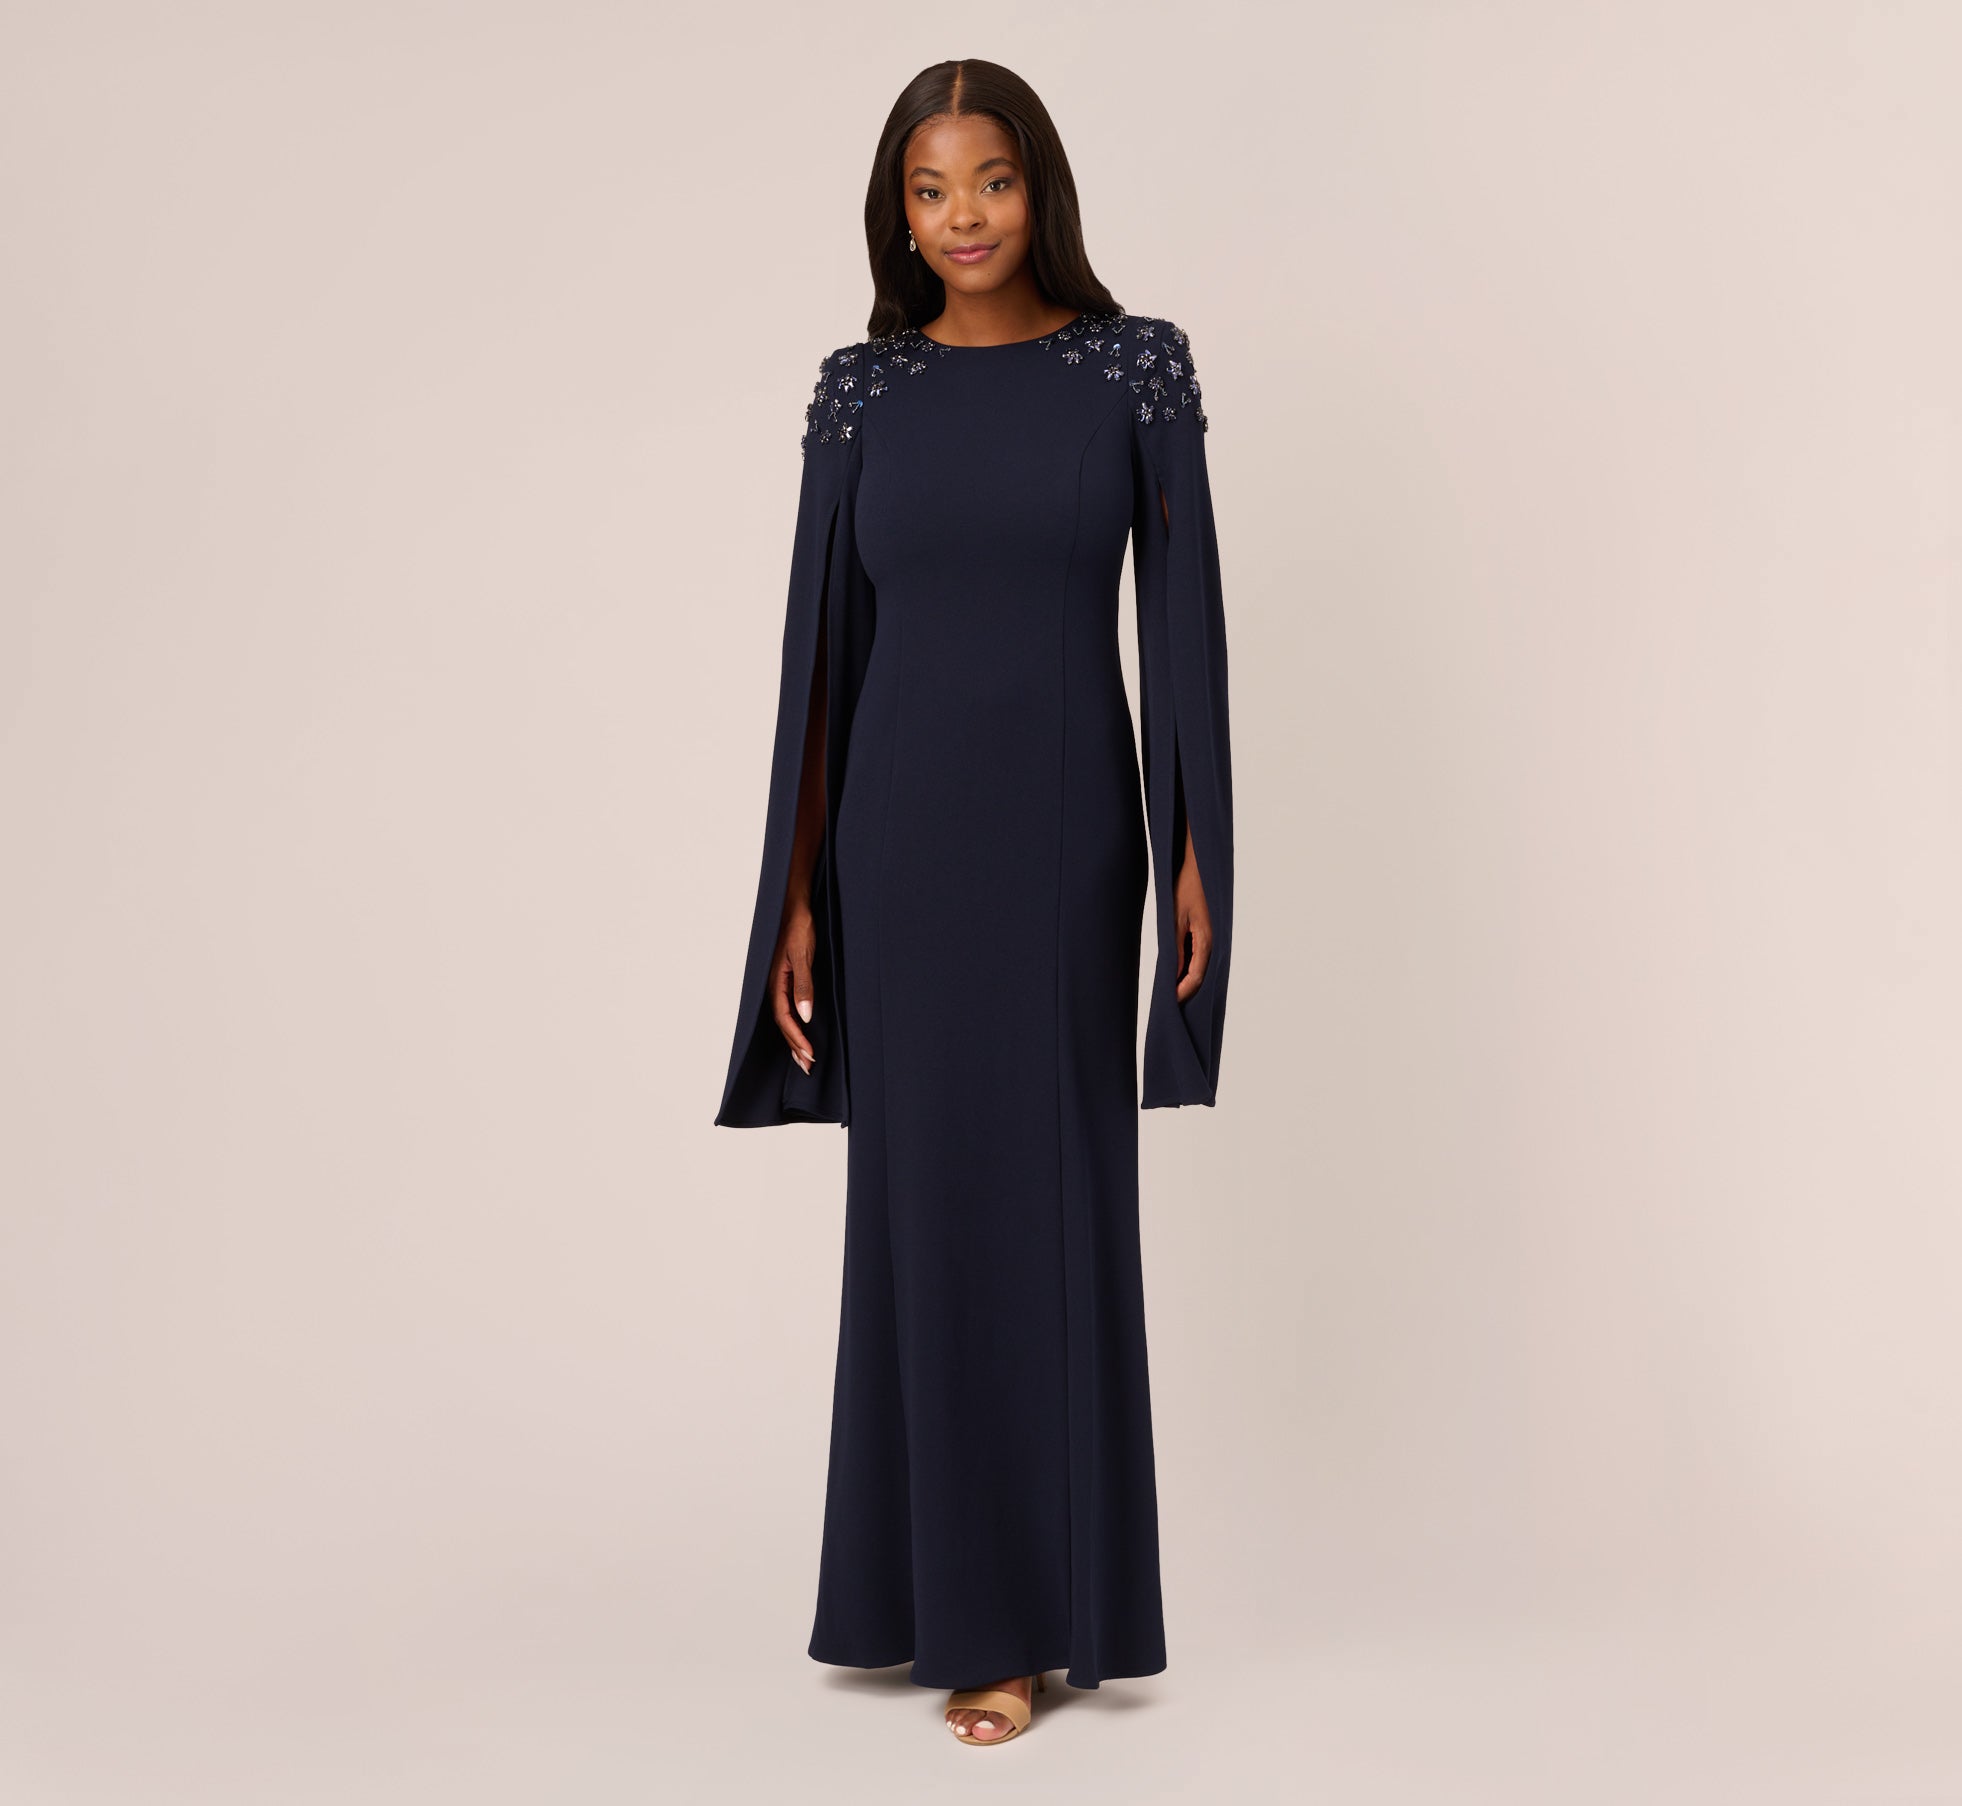 Navy Blue One Shoulder Midnight Blue Evening Gown With Long Sleeves, A Line  Split, Satin Lace, And Beading Perfect For Formal Prom And Soiree In 2021  From Verycute, $45.23 | DHgate.Com